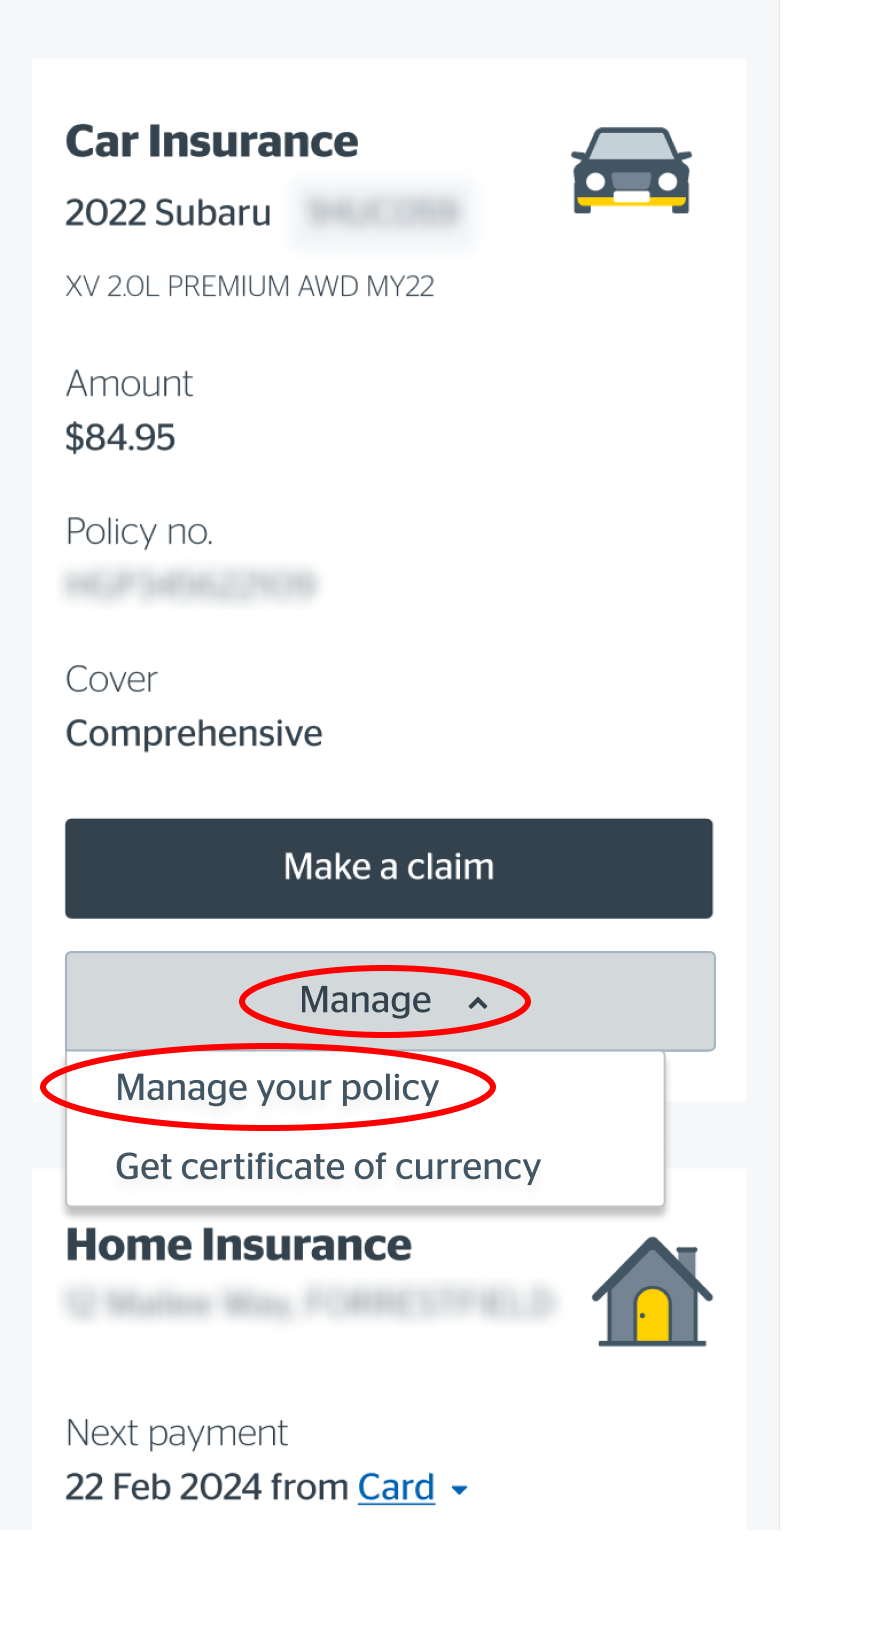 Selecting Manage my policy from dropdown on mobile